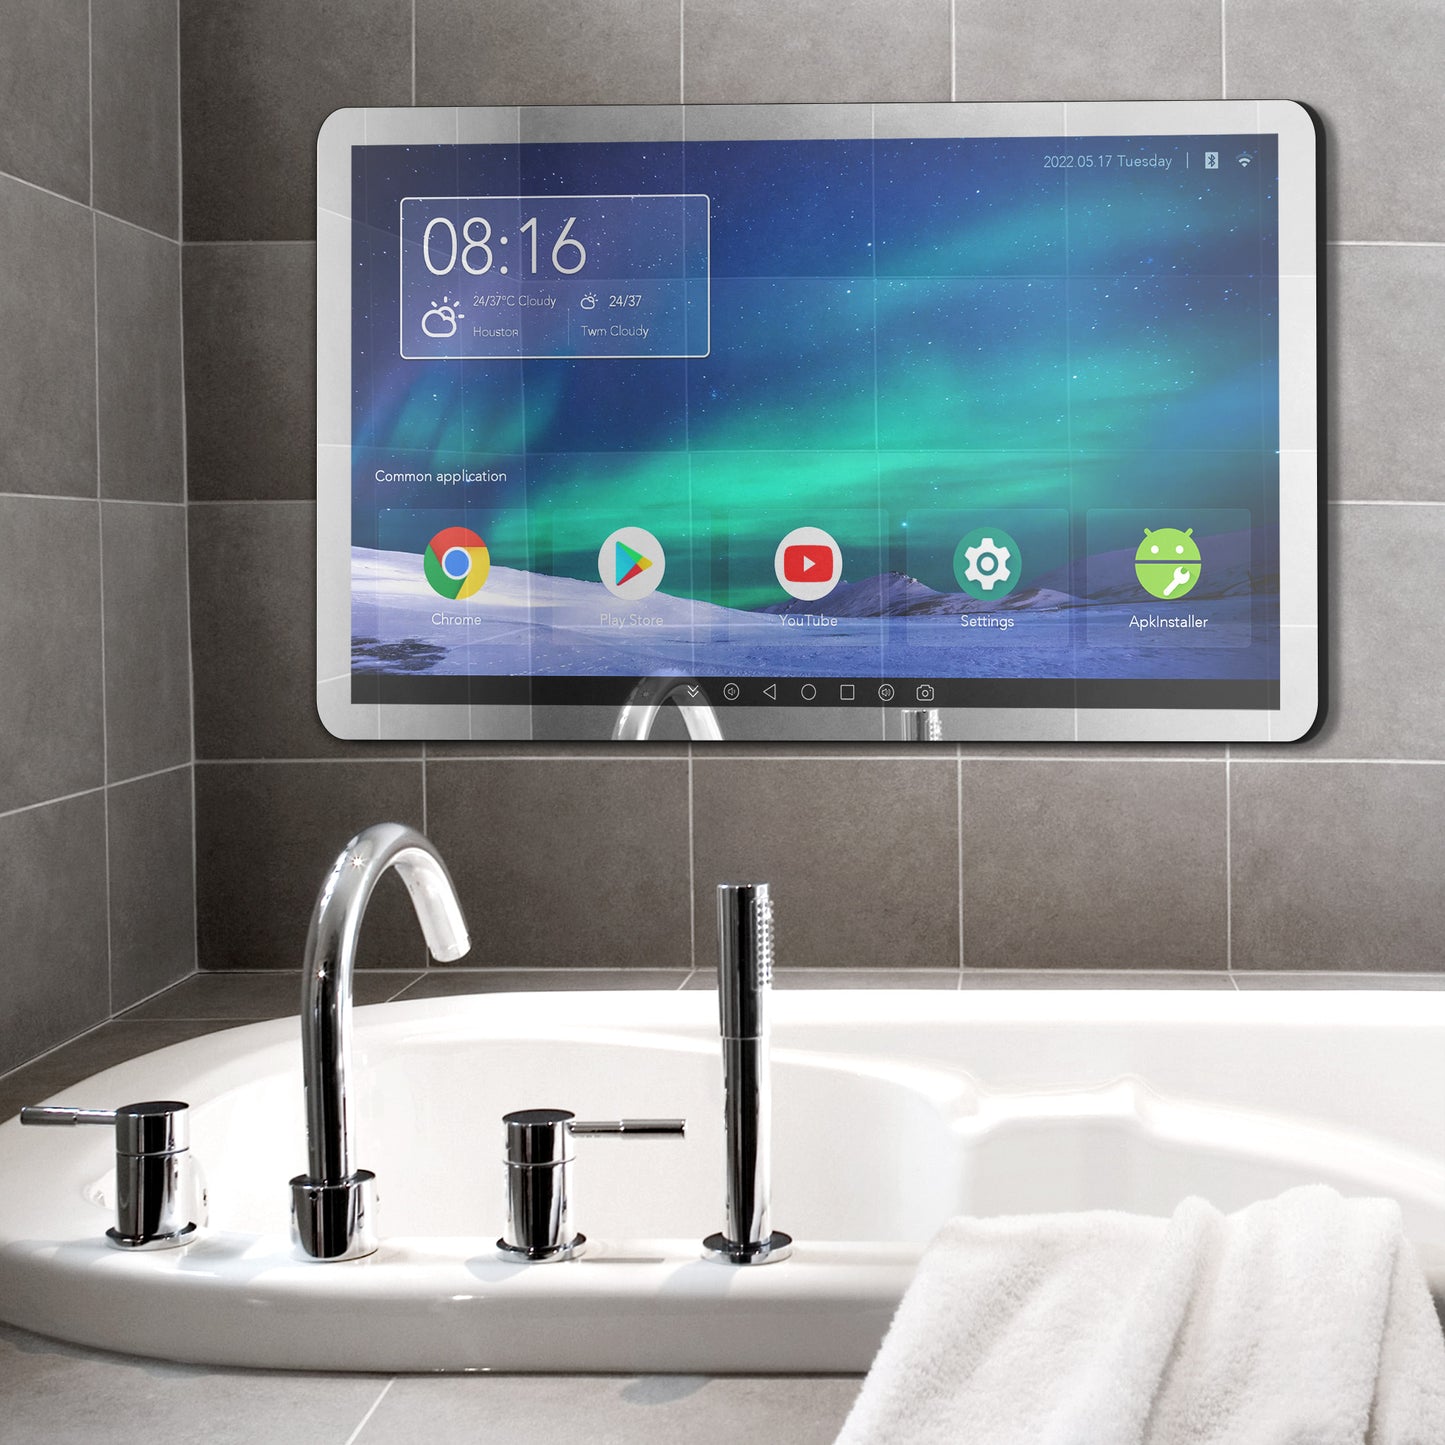 21.5 inch Touch Screen Mirror IP66 Waterproof TV for Bathroom Shower - Support 360° Rotation, 500 nits High Brightness Full HD 1080P LED Built-in Android OS WiFi/LAN/USB/BT/HDMI( LEOSMJMG-215)